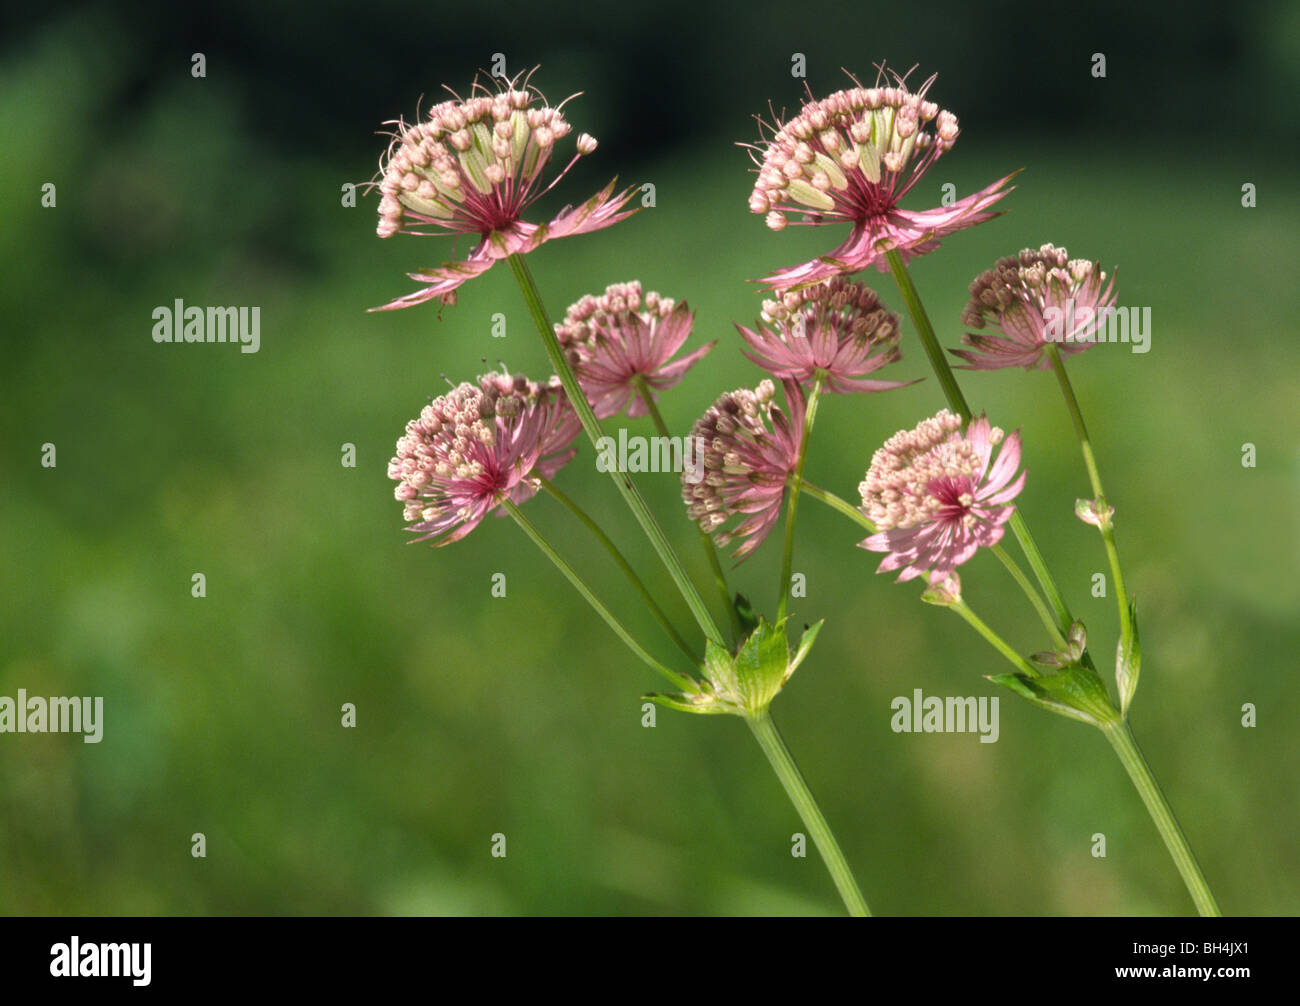 Group of flowers of great masterwort or mountain sanicle (Astrantia major) growing in a meadow on a mountain slope. Stock Photo